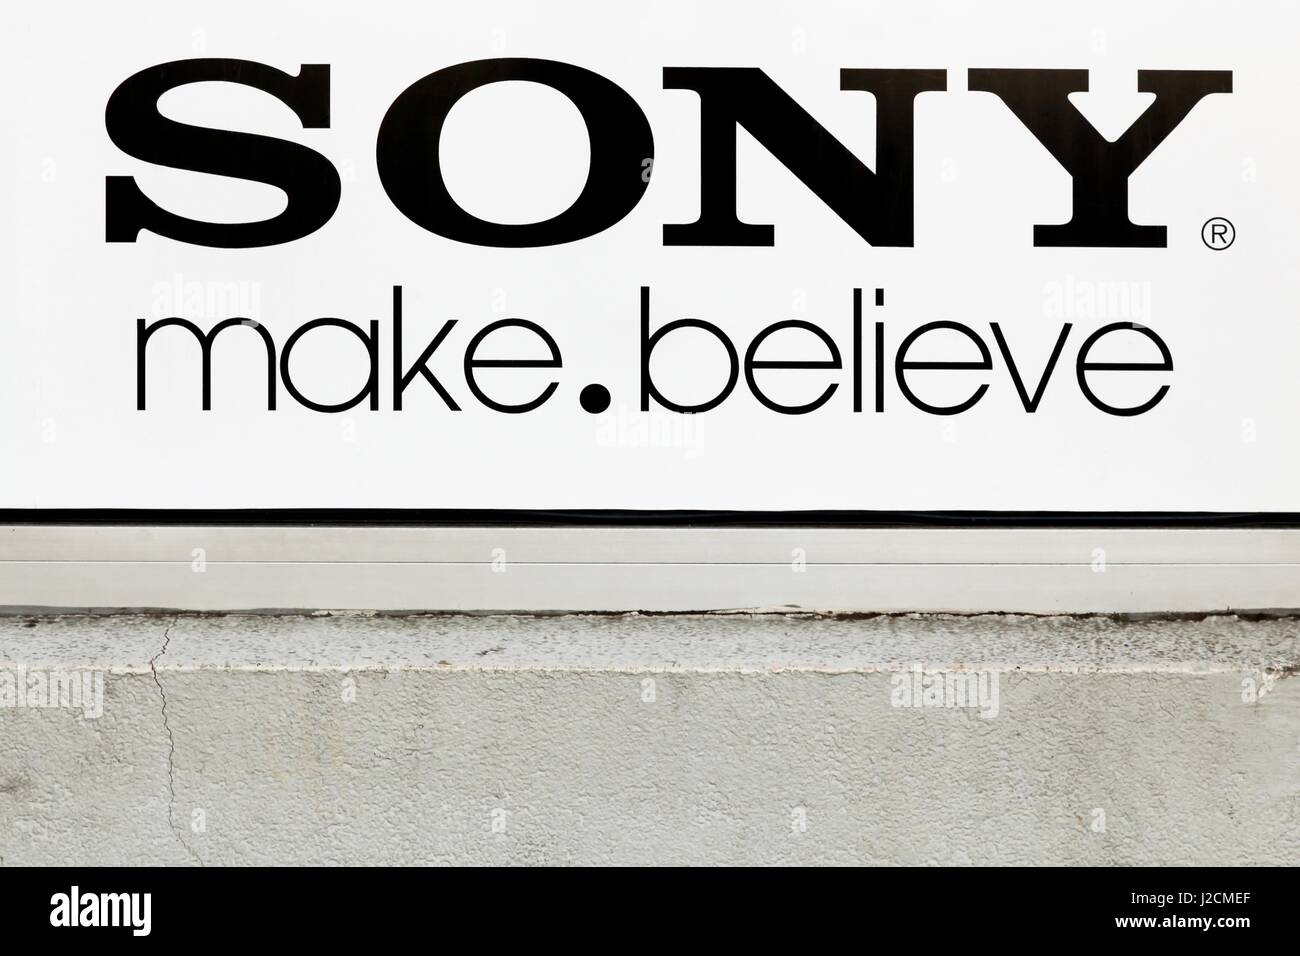 Villefranche, France - March 13, 2017: Sony logo on a wall. Sony is a Japanese multinational conglomerate corporation that is headquartered in Konan, Stock Photo